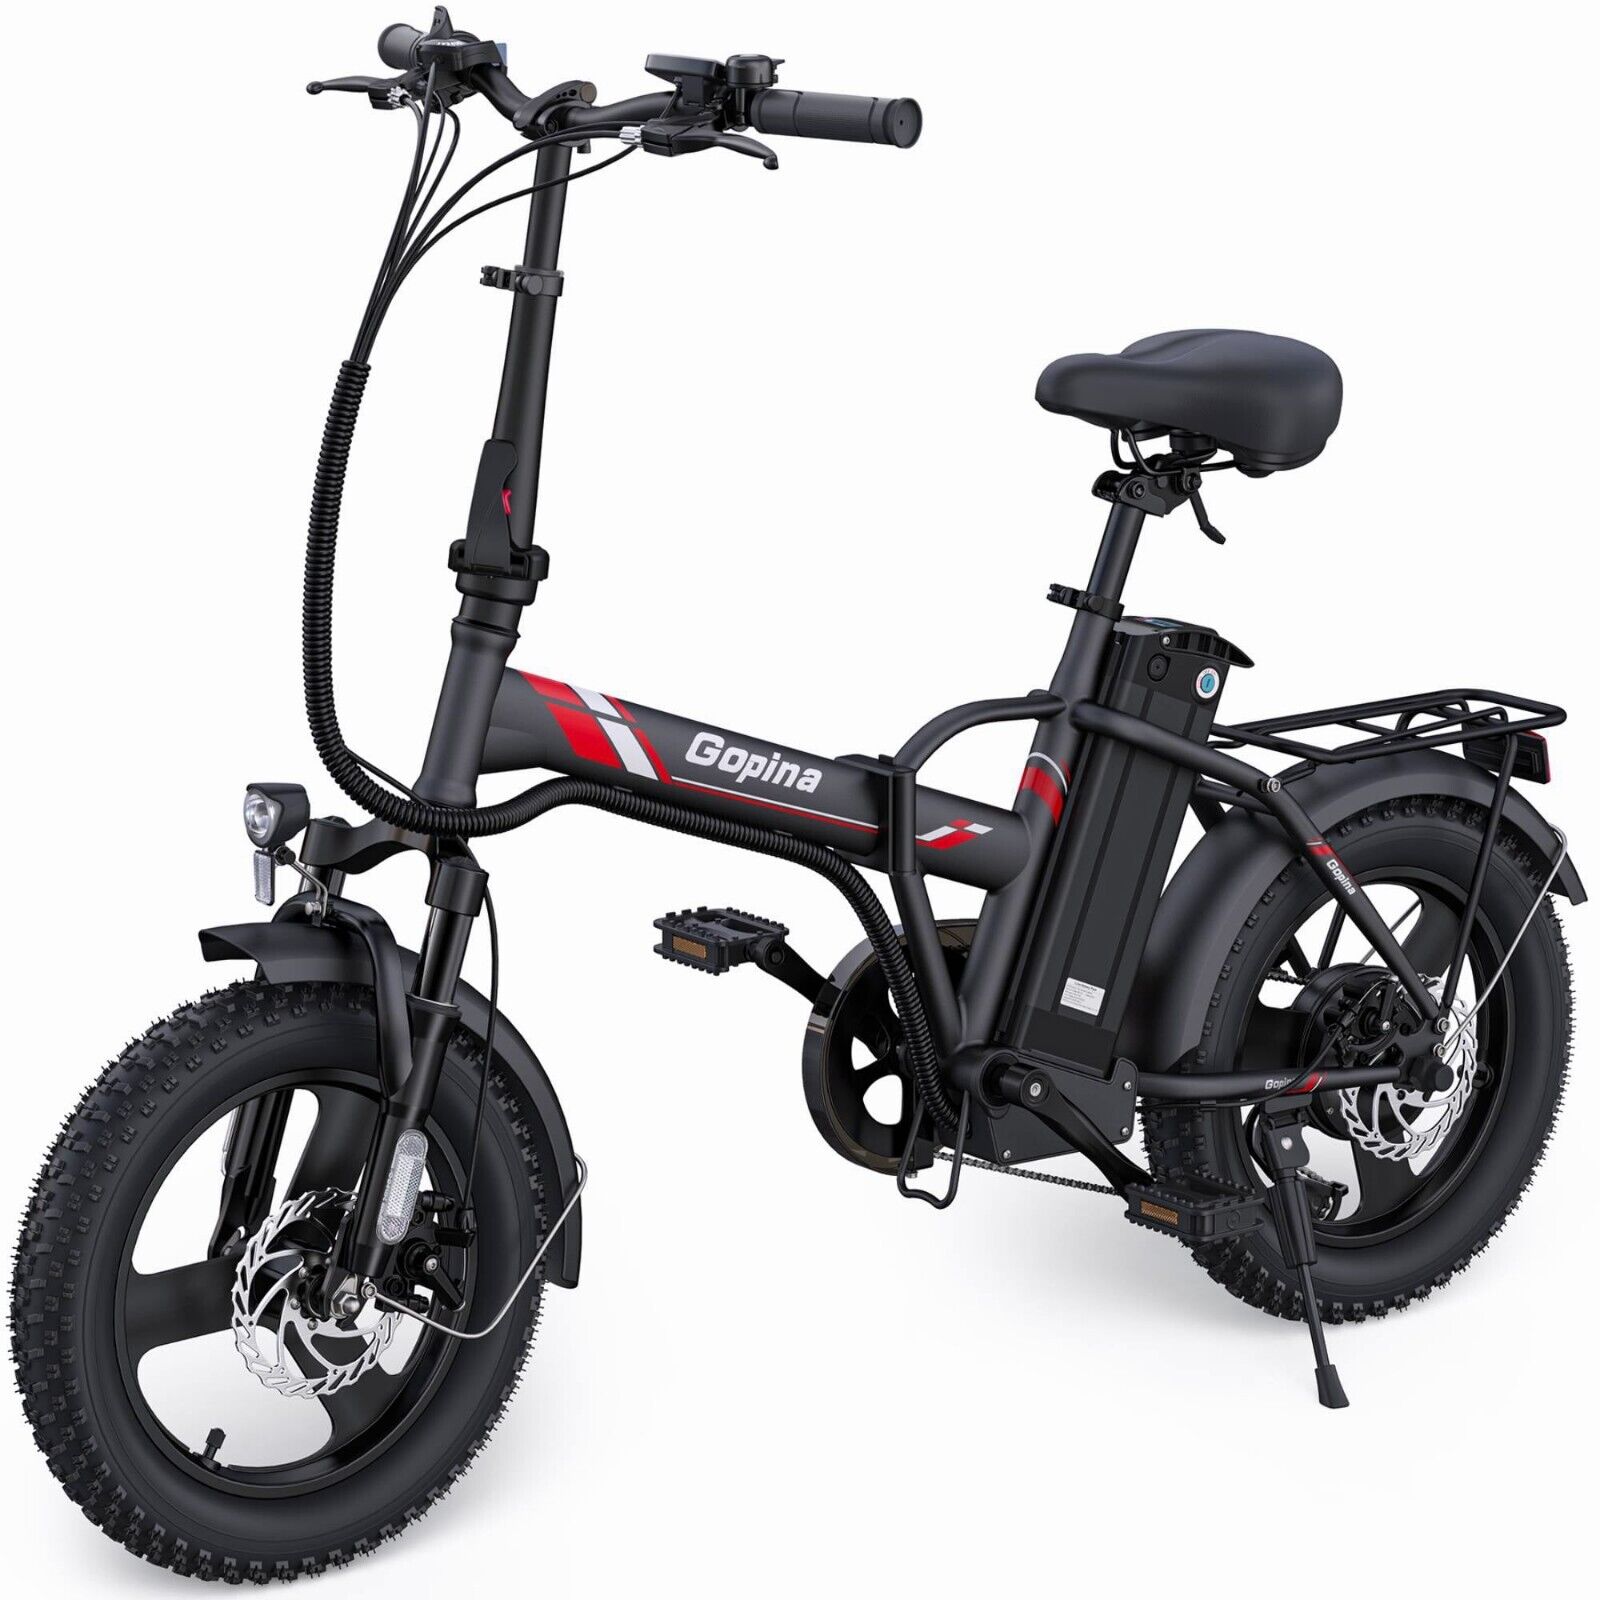 Electric Bicycle for Sale: Electric Bike 16" x 3.0 Fat Tire Foldable Electric Bicycle for Adults 350W 48V in Hacienda Heights, California